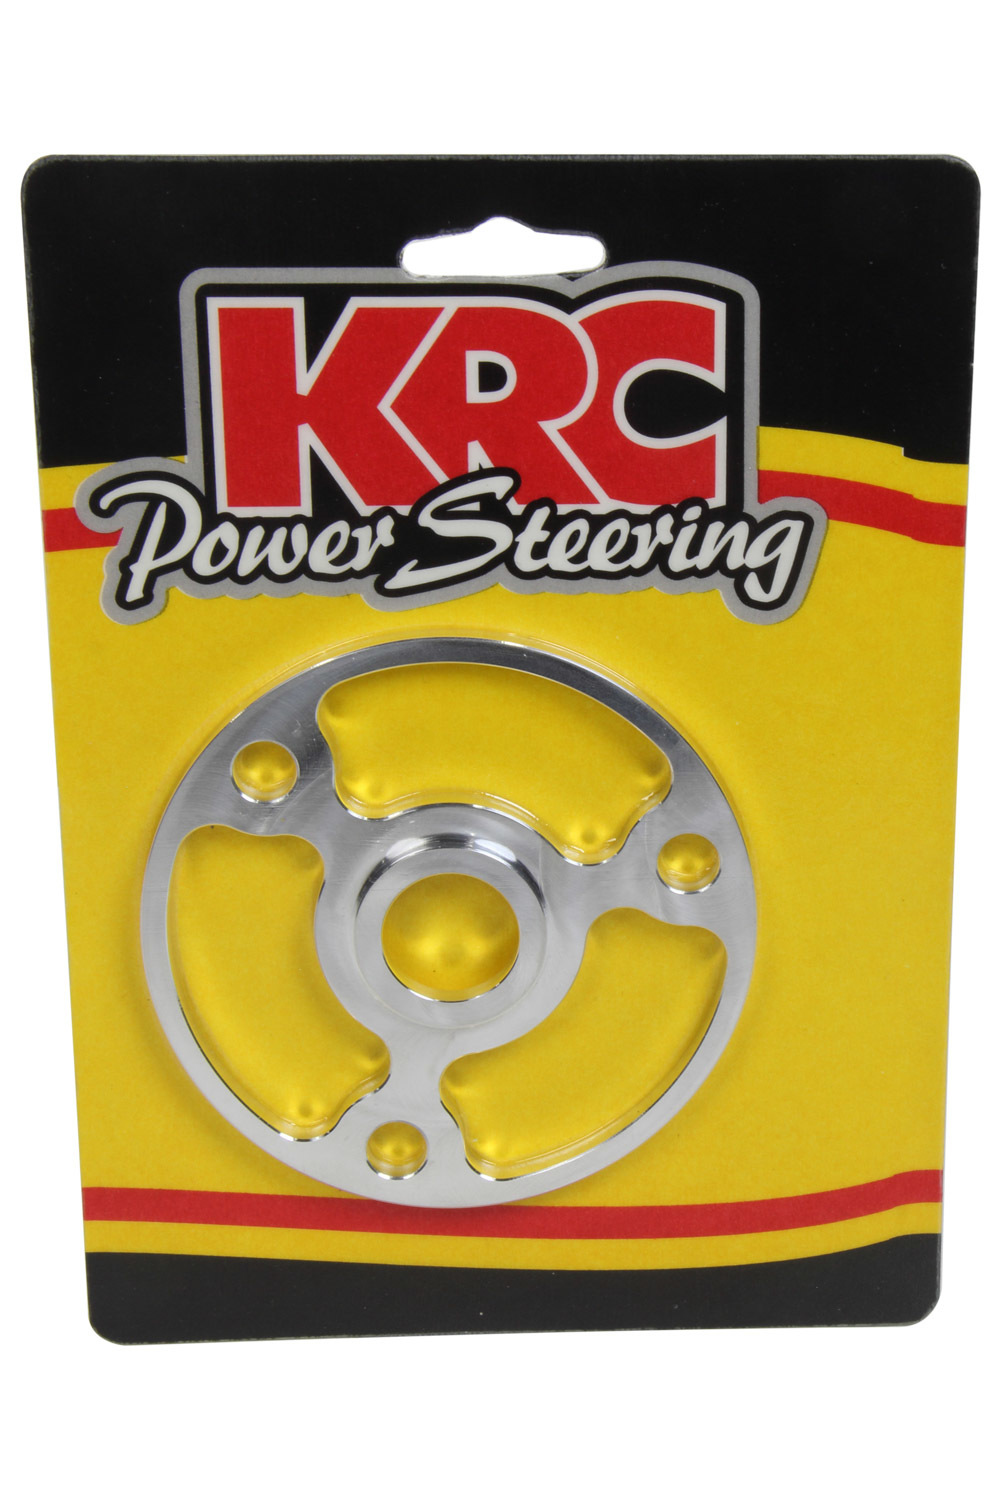 KRC Power Steering 38815200 Crank Mandrel Spacer, R-Lok, 0.200 in Thick, Aluminum, Natural, KRC R-Lok Pulley Drive System, Chevy V8, Each